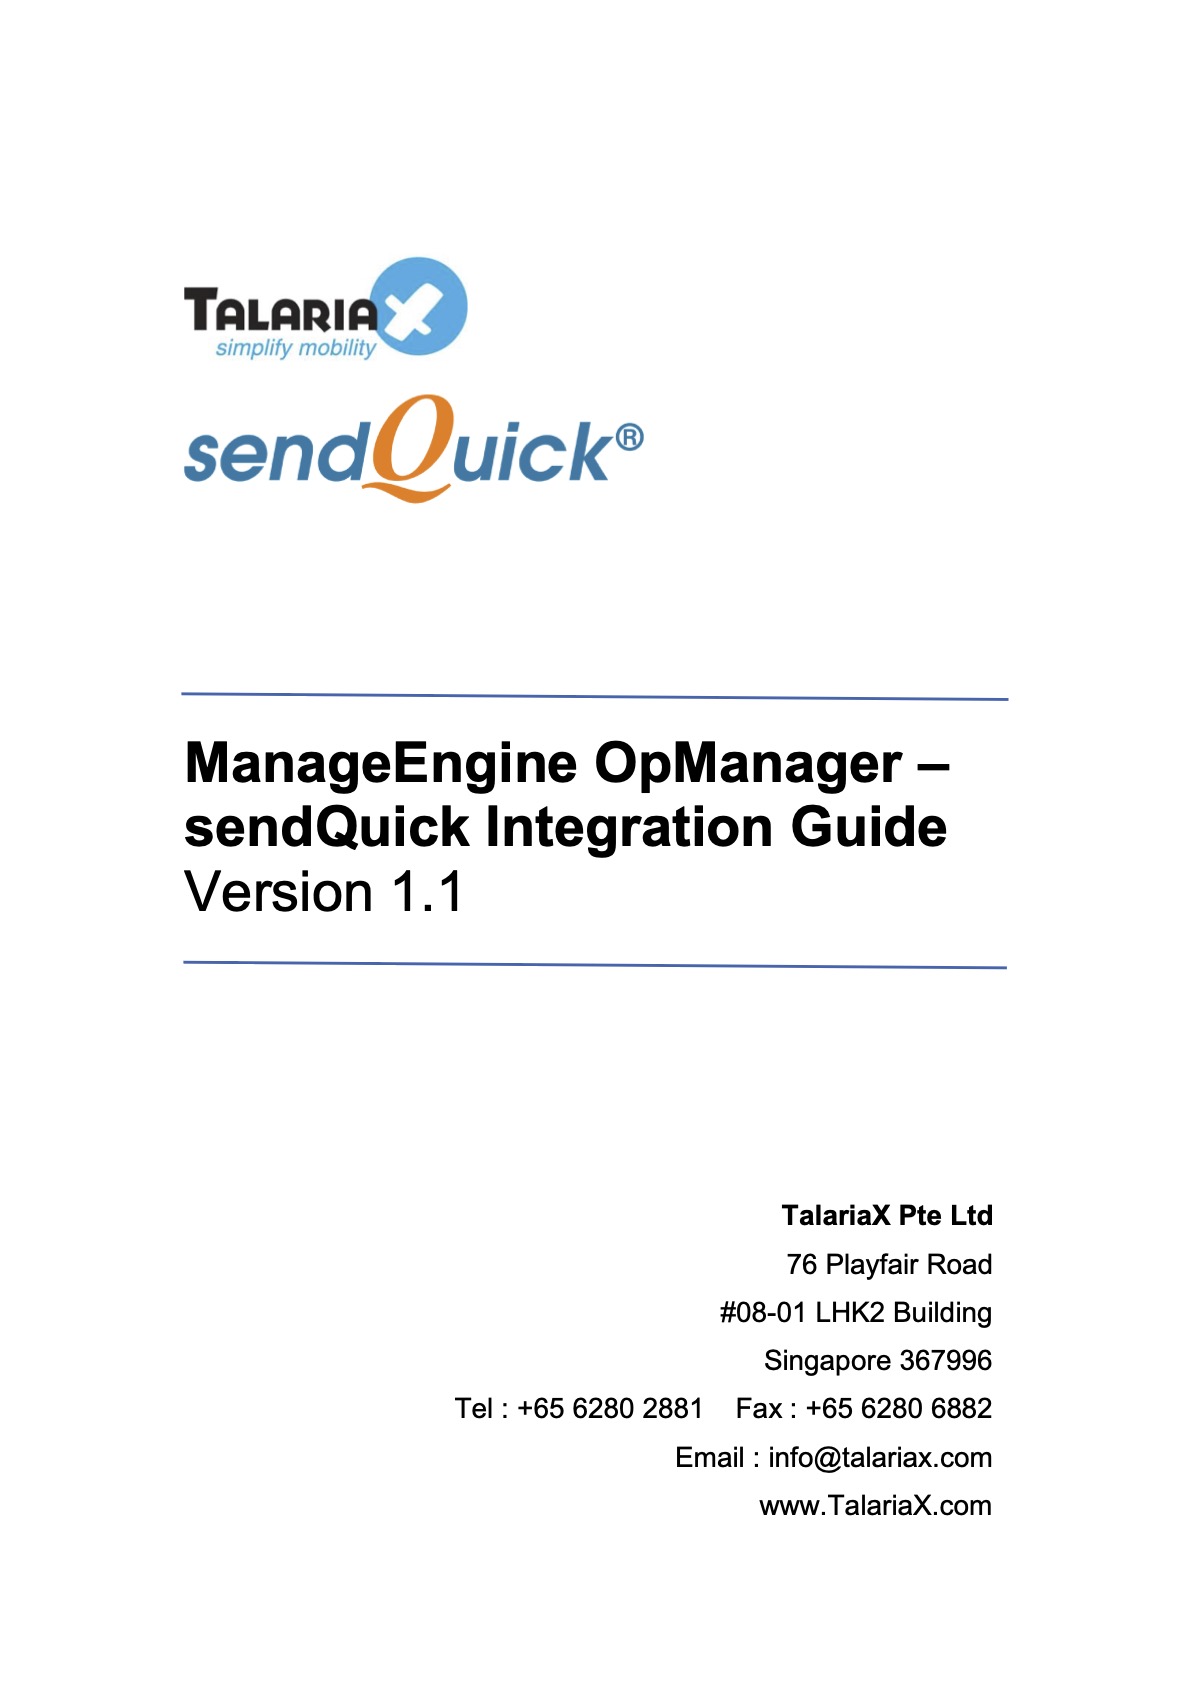 You are currently viewing ManageEngine OpManager sendQuick Integration Guide Version 1.1